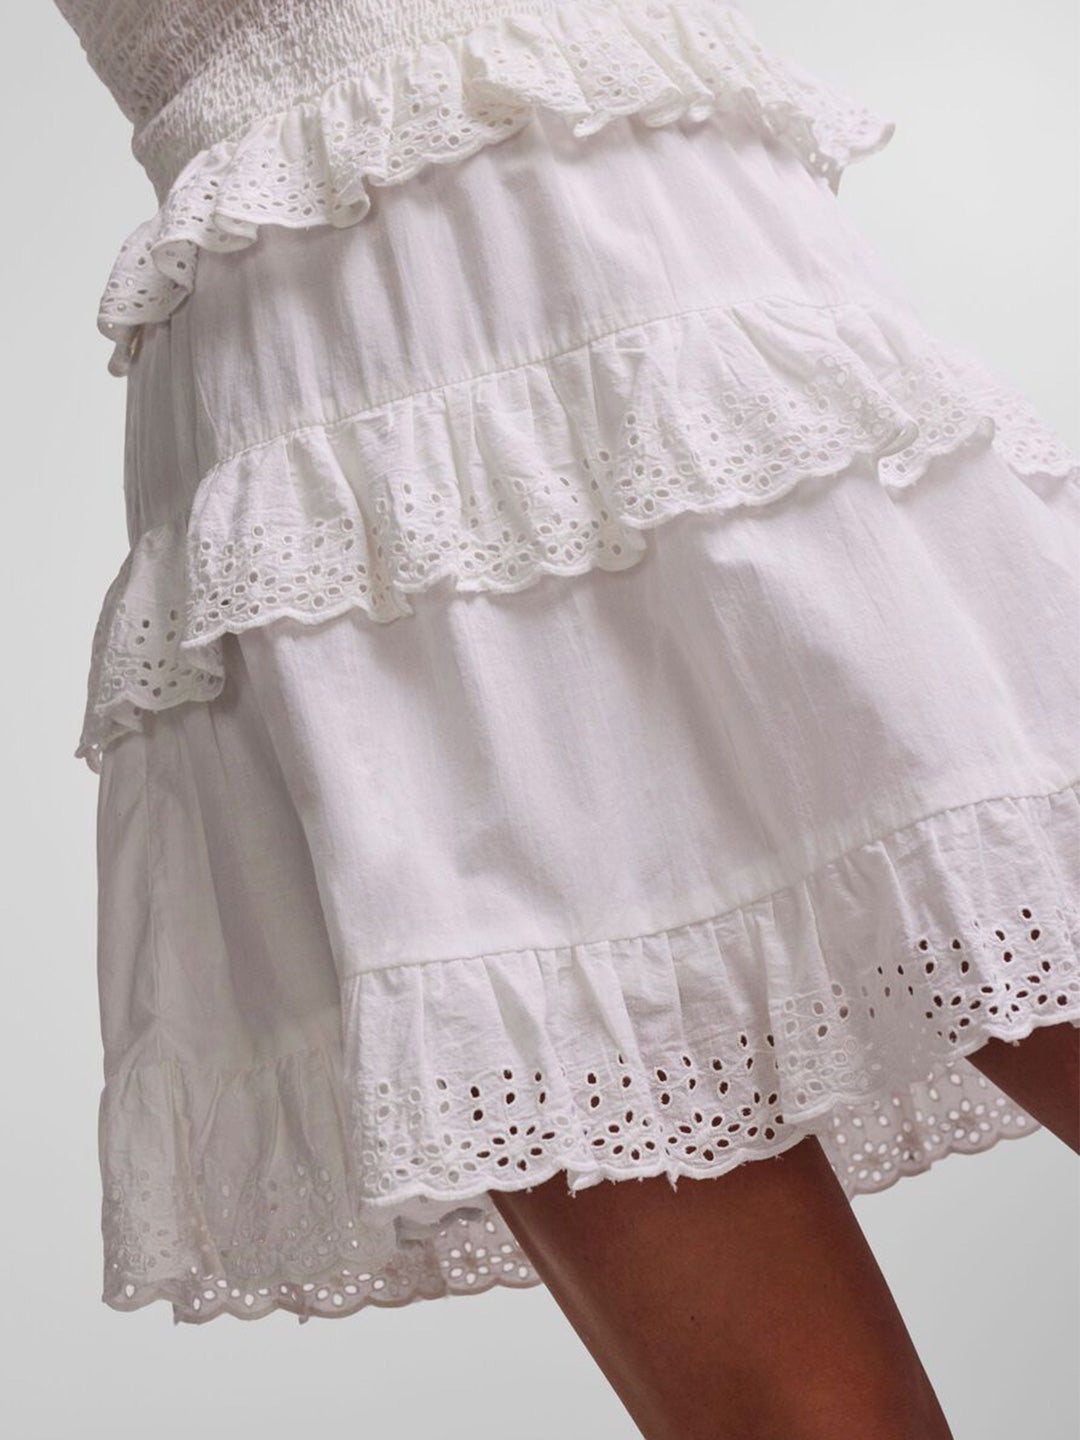 Pieces skirt with broderie anglaise edges and ruffles